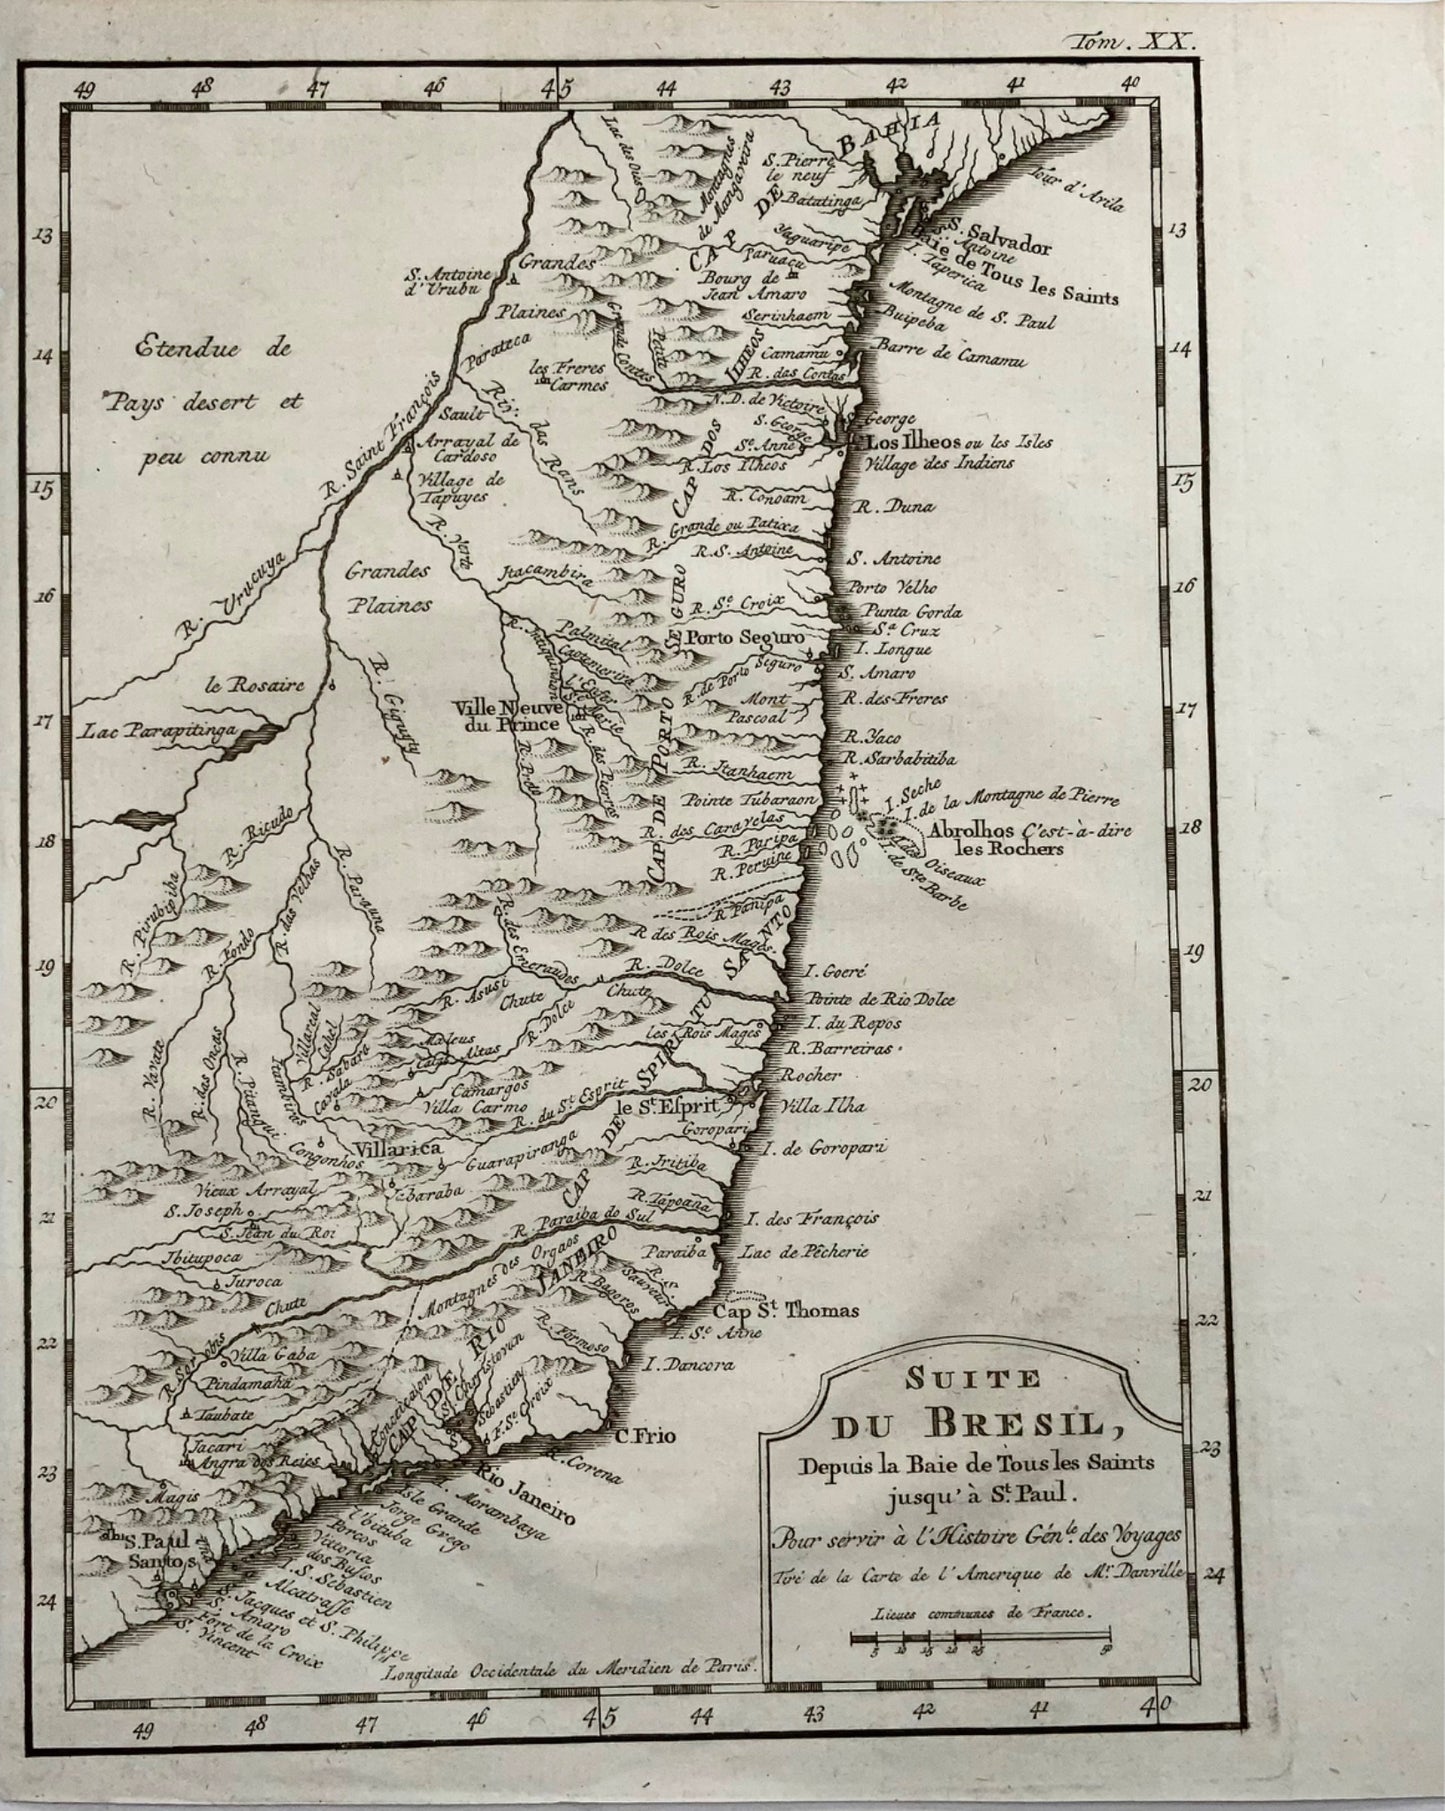 1757 Uruguay and Brazil, Jacques Bellin, ‘Suite du Bresil’, engraved map